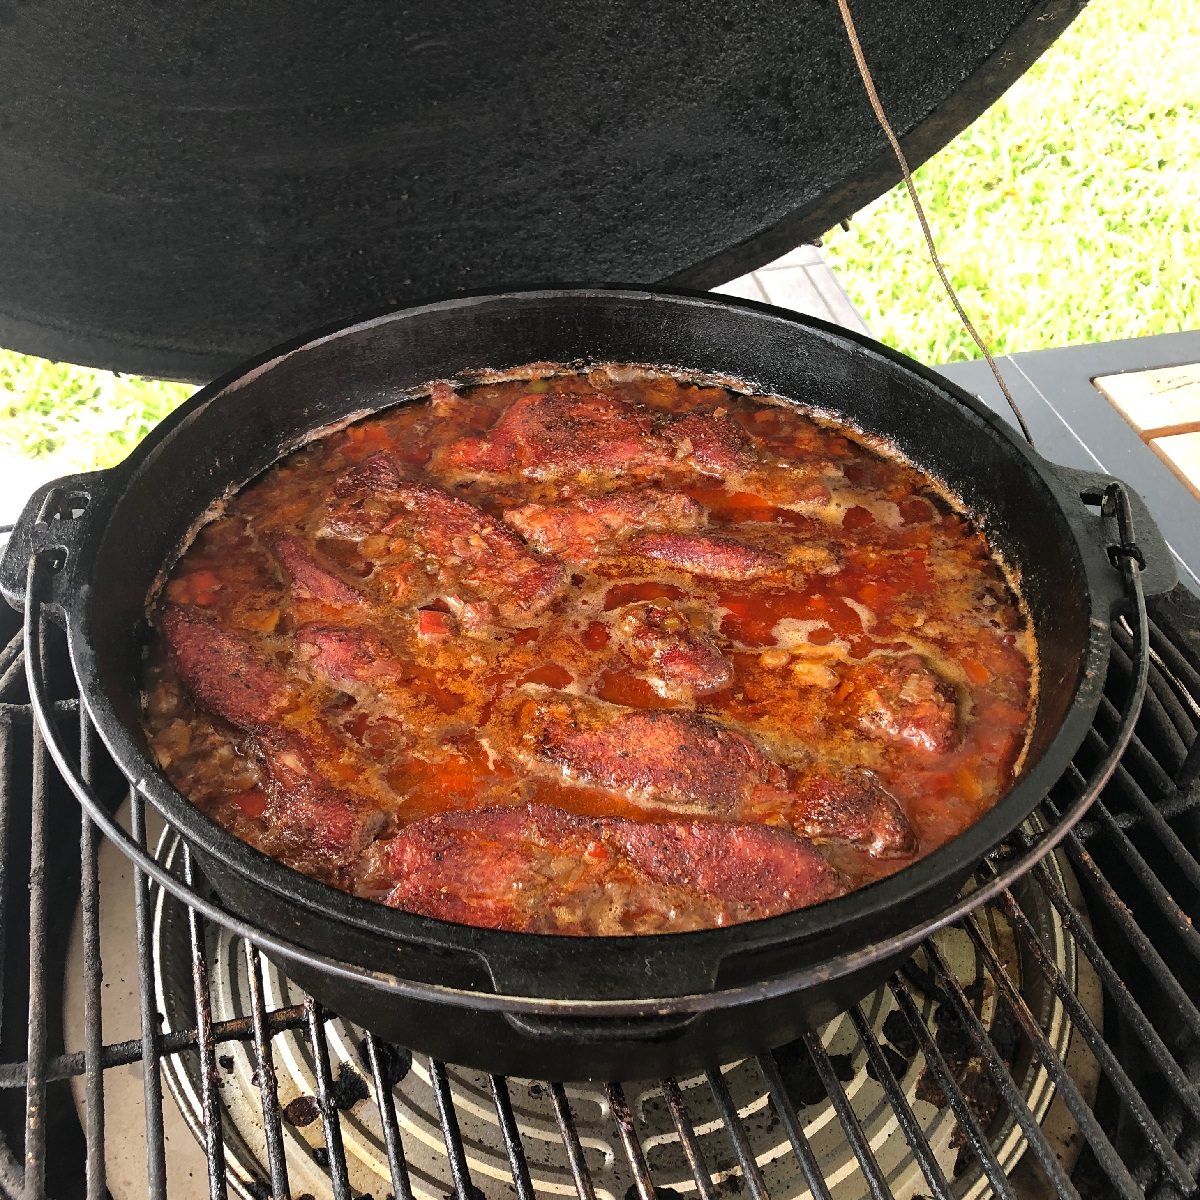 Simmer with ribs on grill